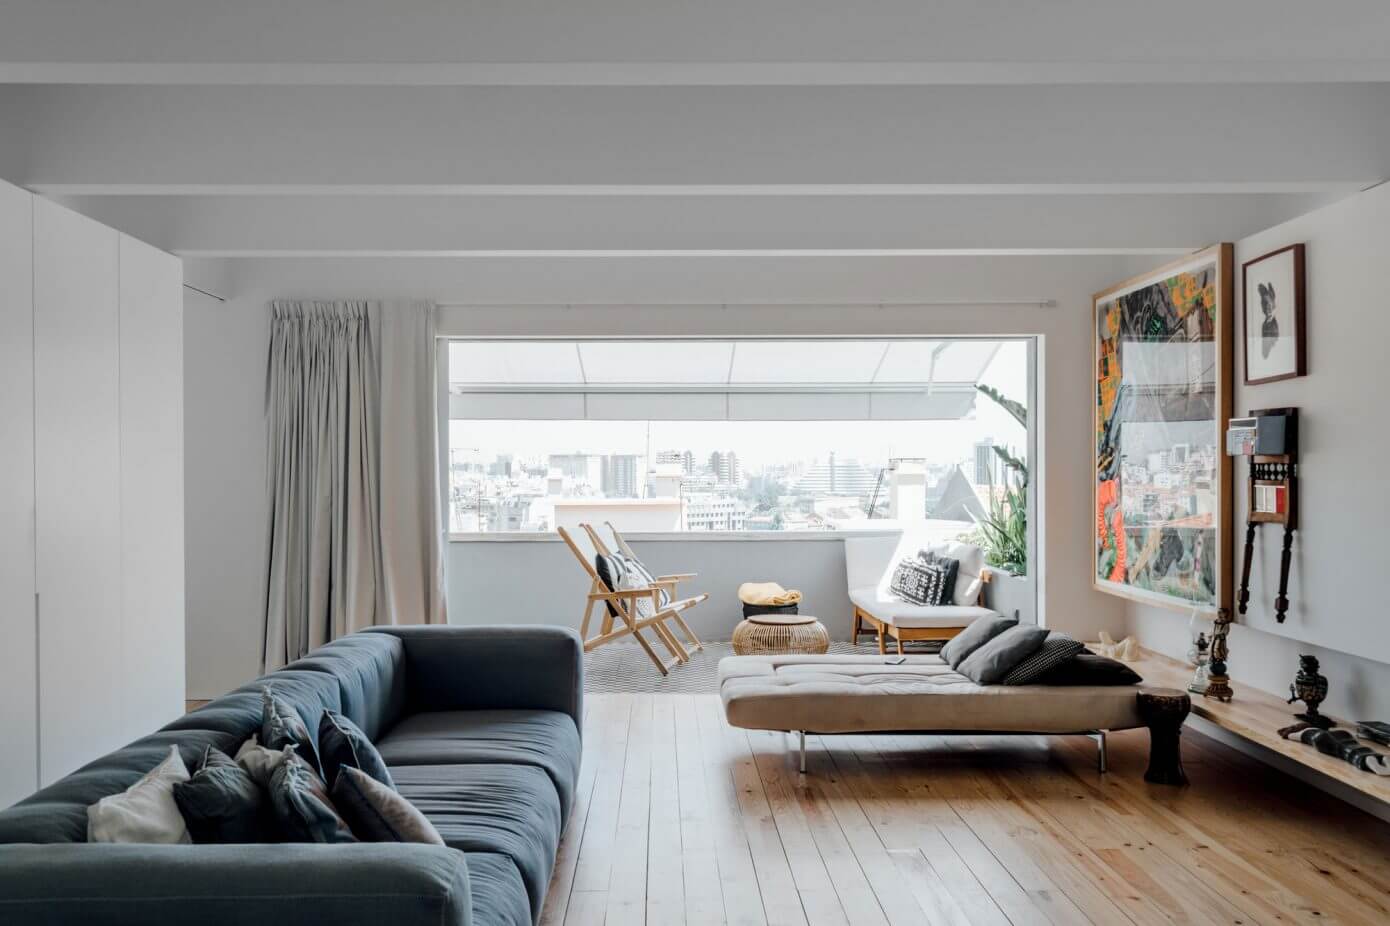 Apartment Remodel by Atelier Data